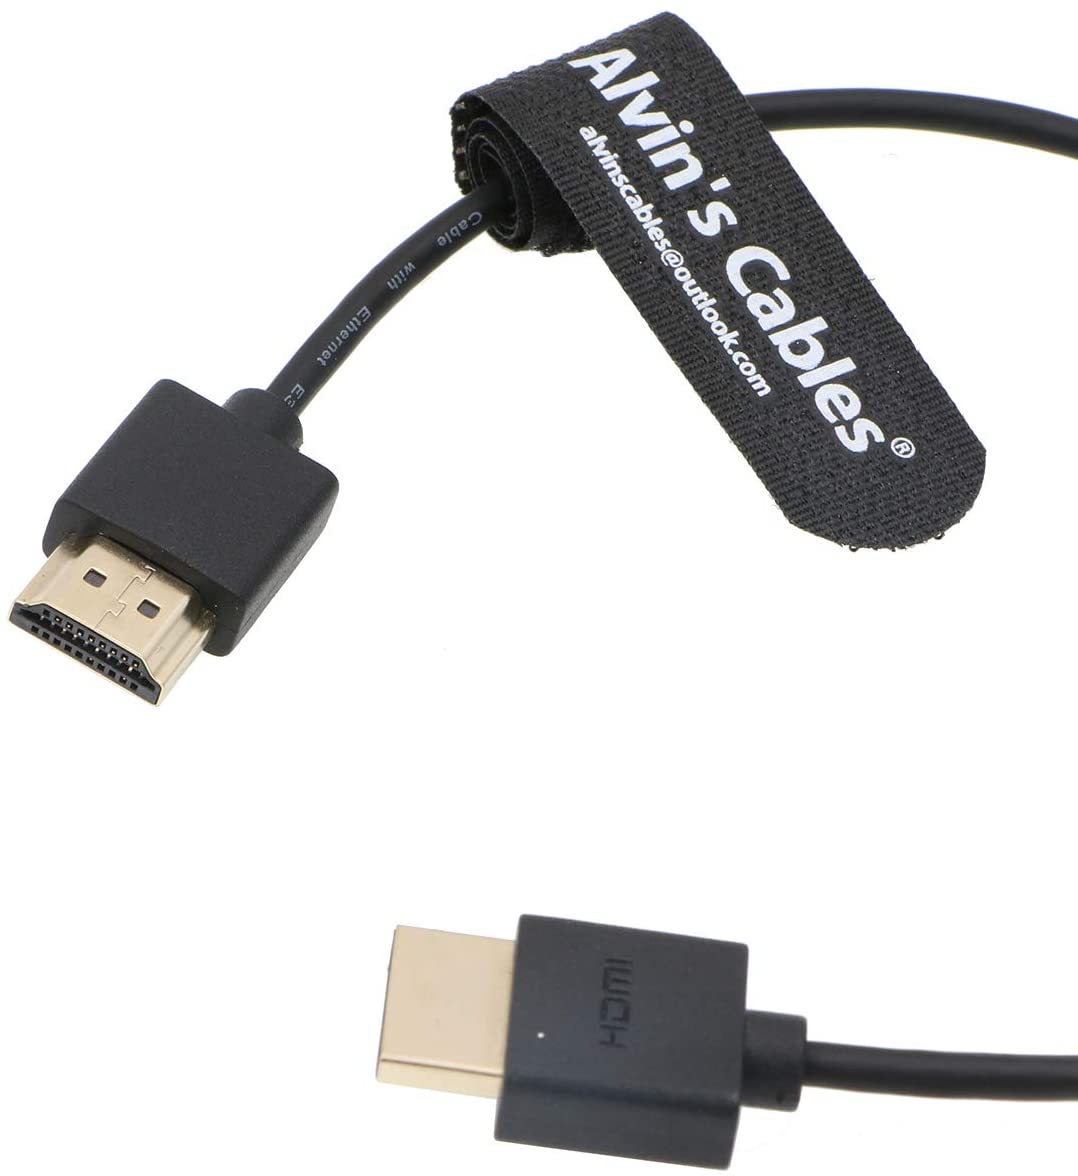 Alvin's Cables Z Cam E2 HDMI Cable High Speed Ethernet for Portkeys BM5 Monitor Straight to Straight